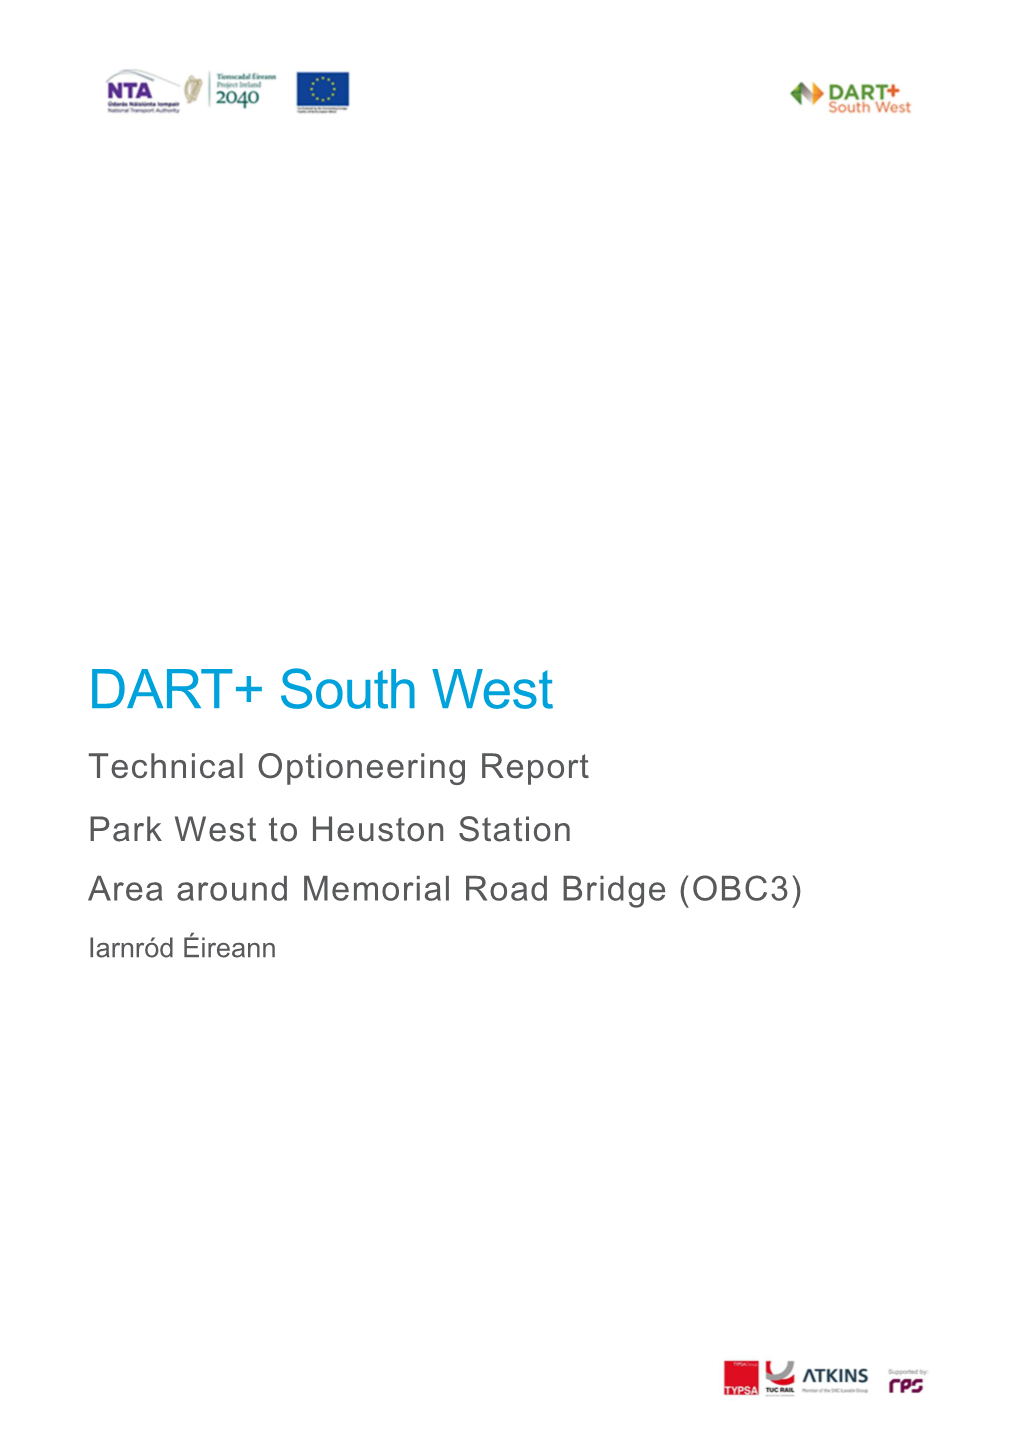 DART+ South West Technical Optioneering Report